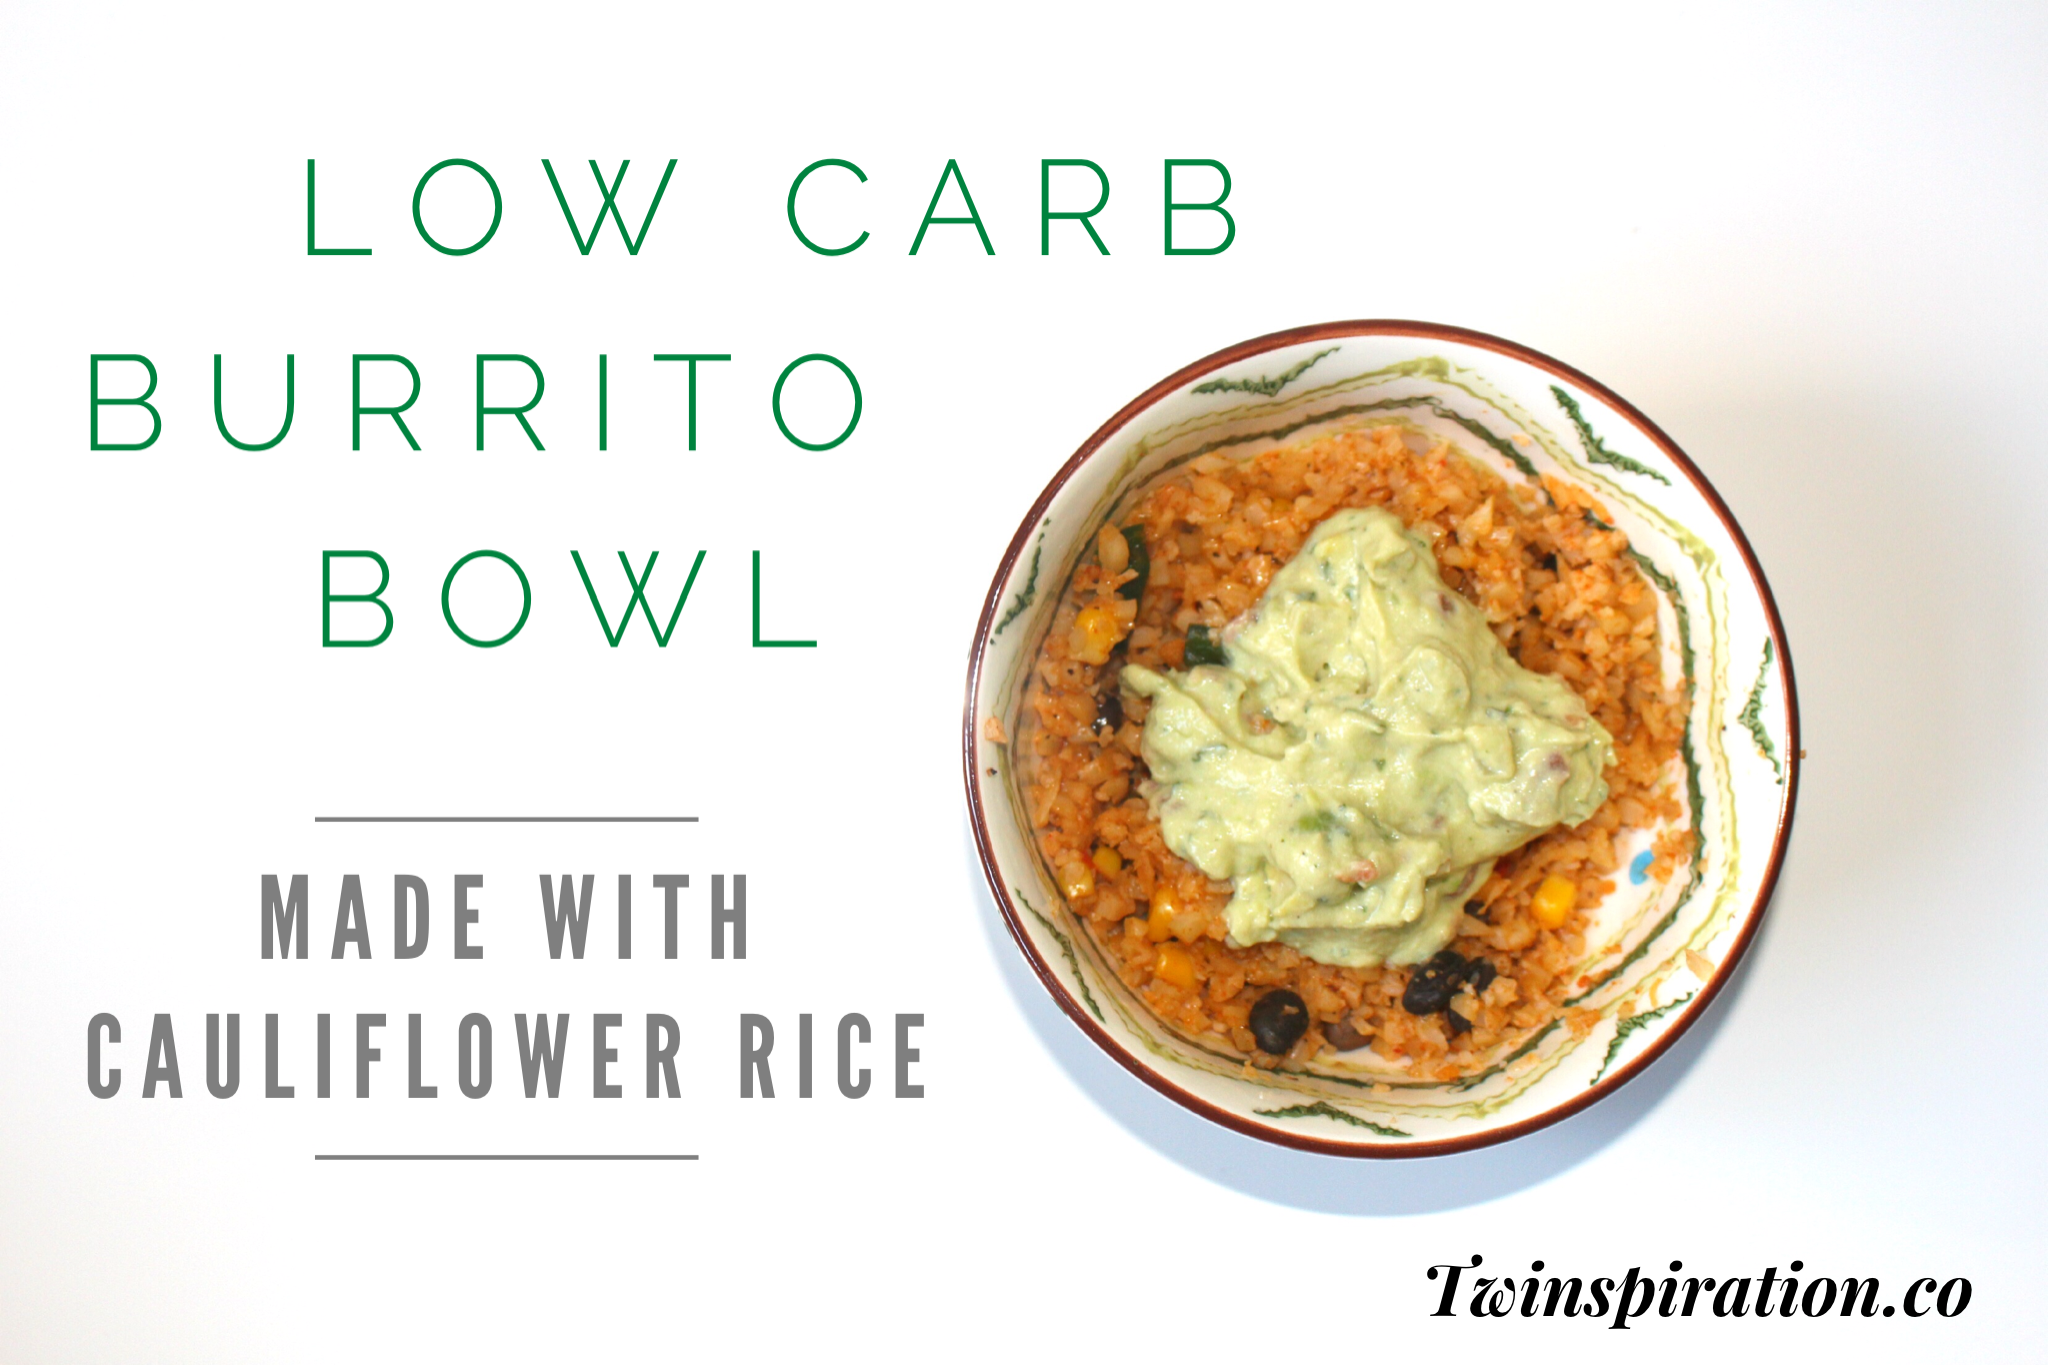 Low Carb Burrito Bowl Made With Cauliflower Rice